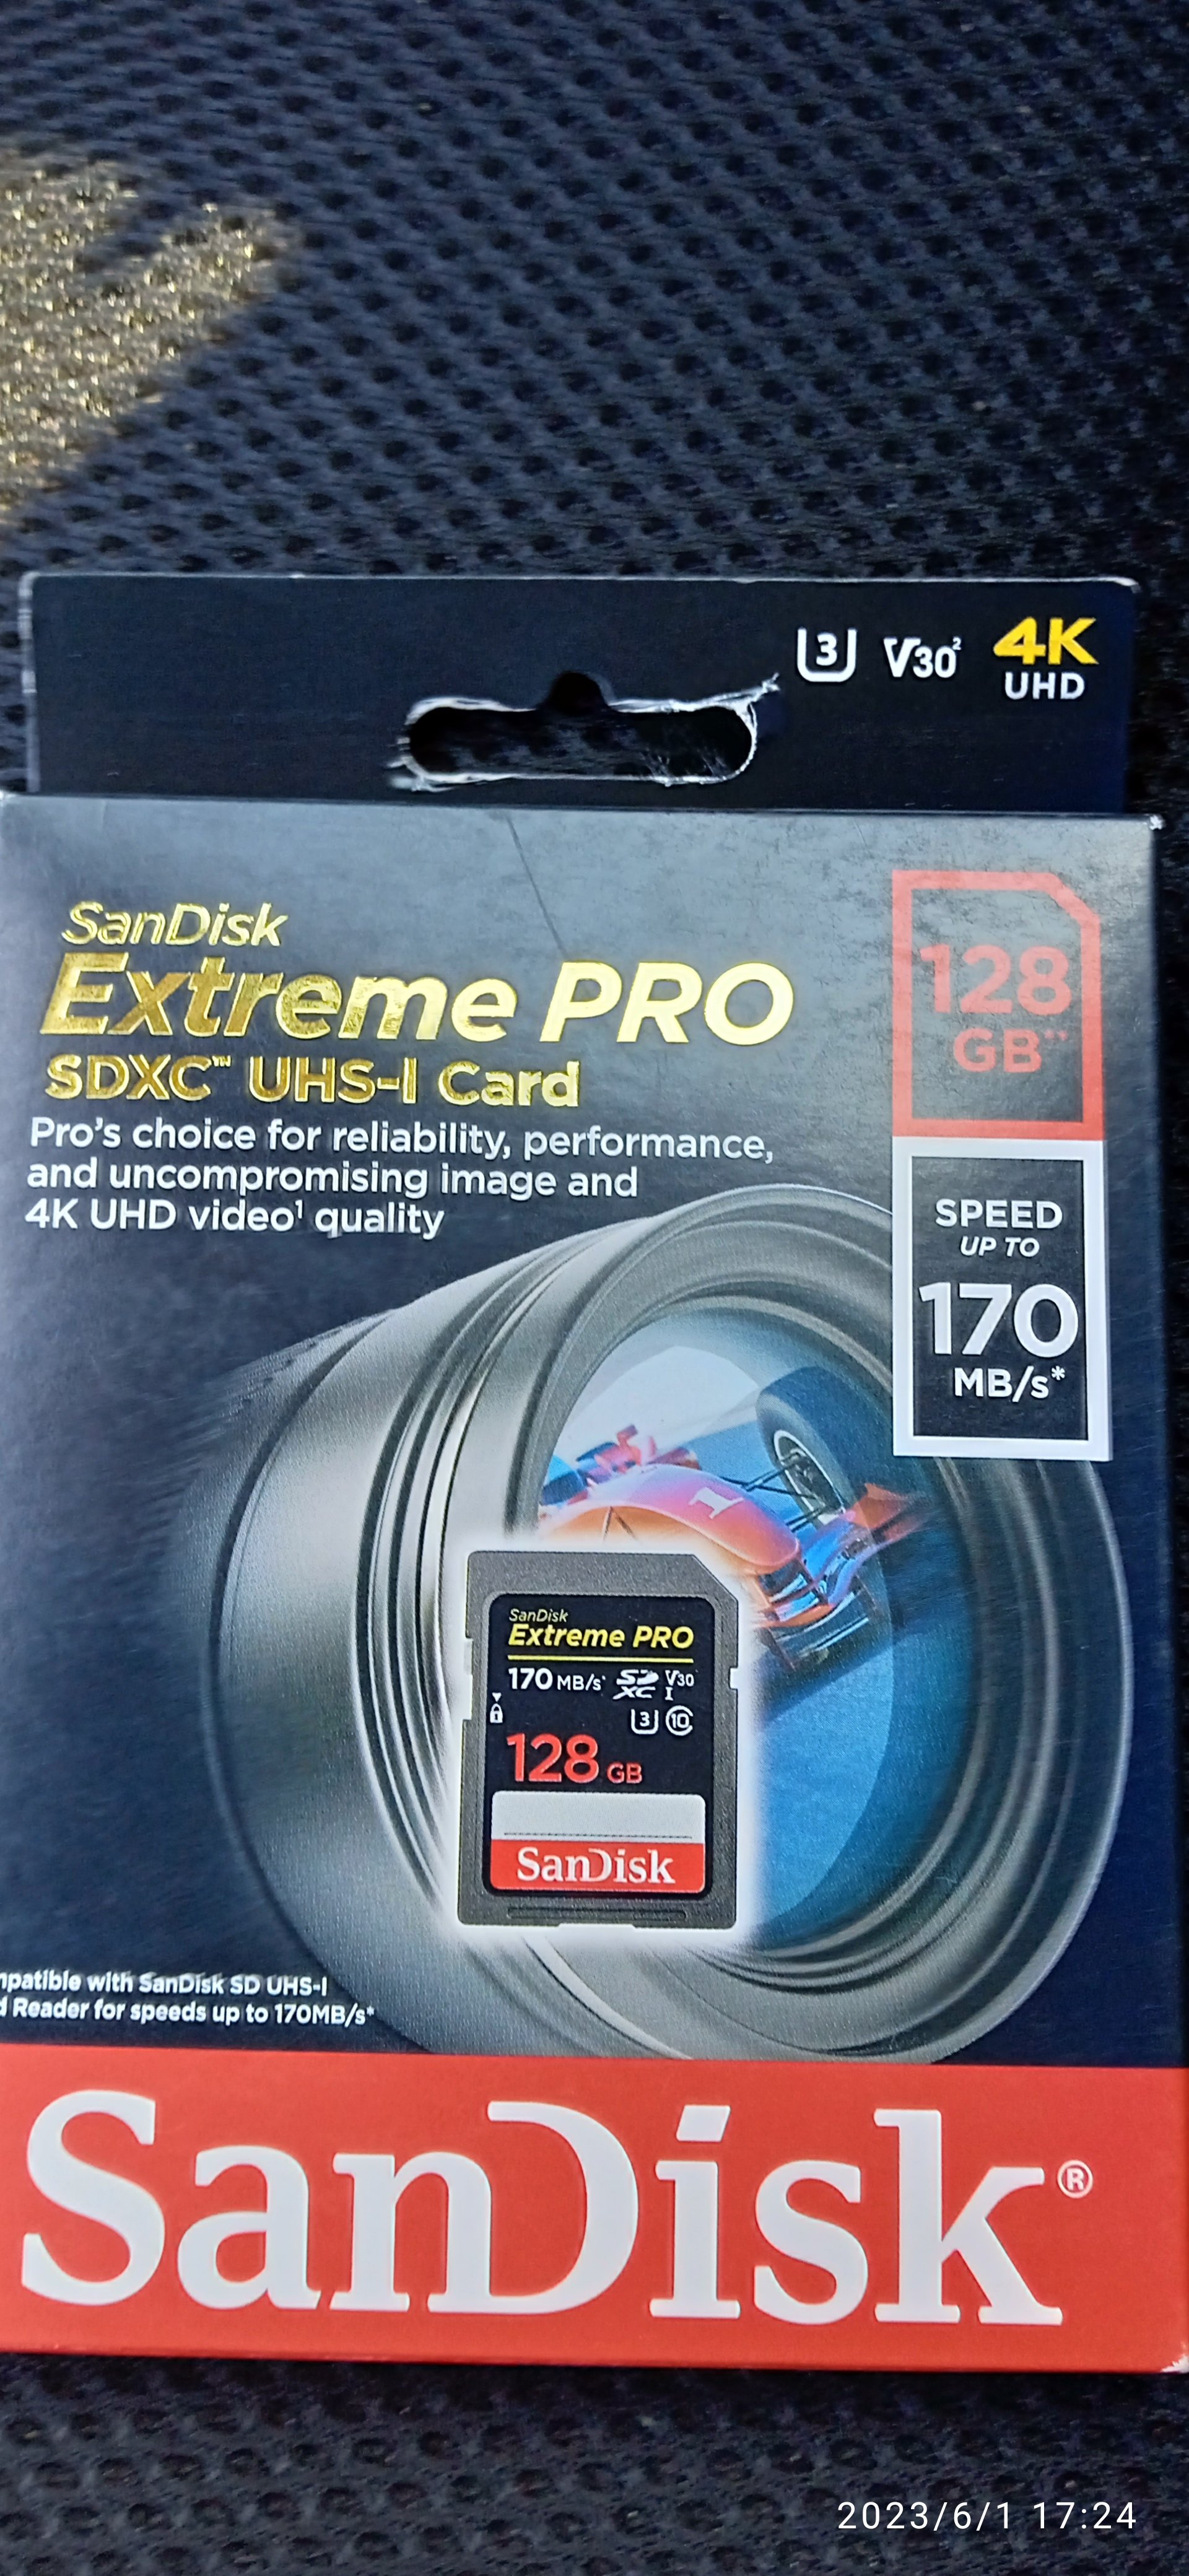 More information about "San Disc Extreme Pro Sdxc Card 128GB"